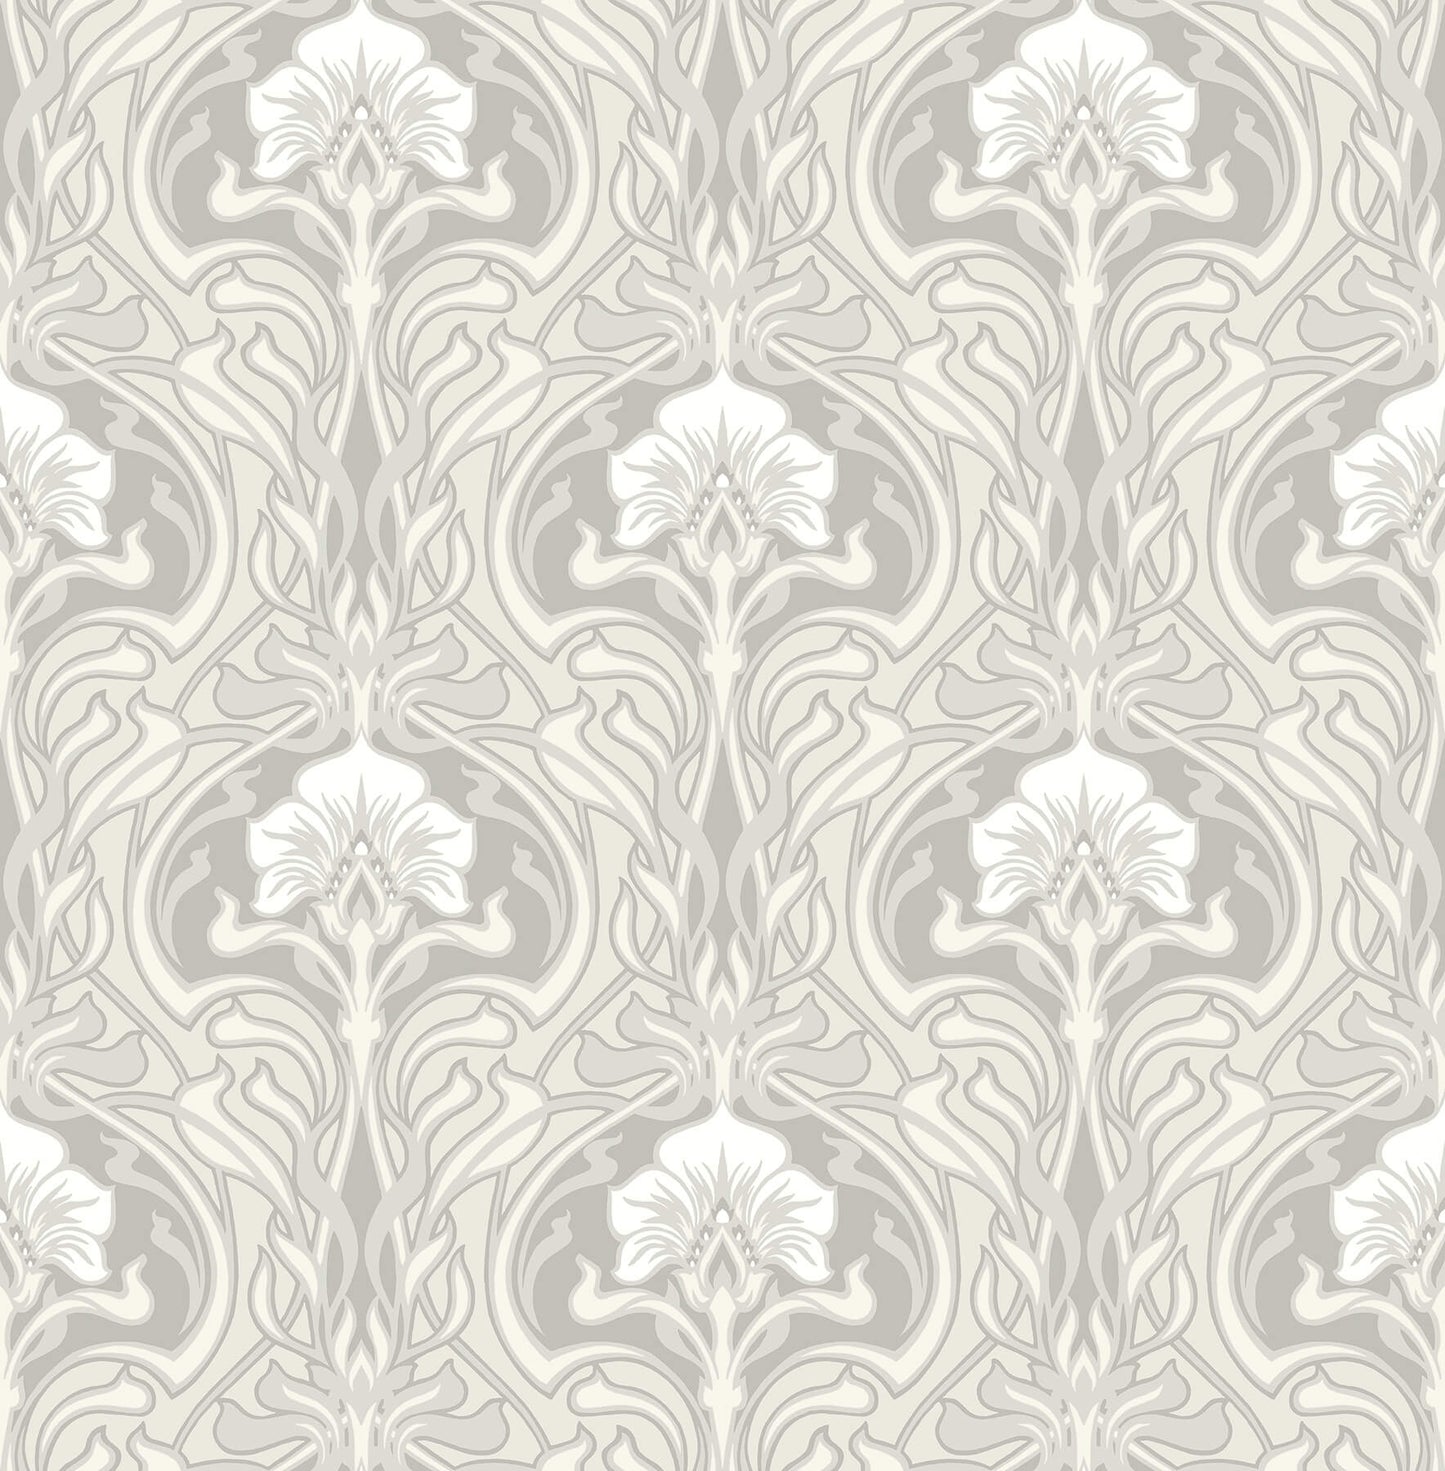 A-Street Prints Revival Mucha Ogee Wallpaper - Off White